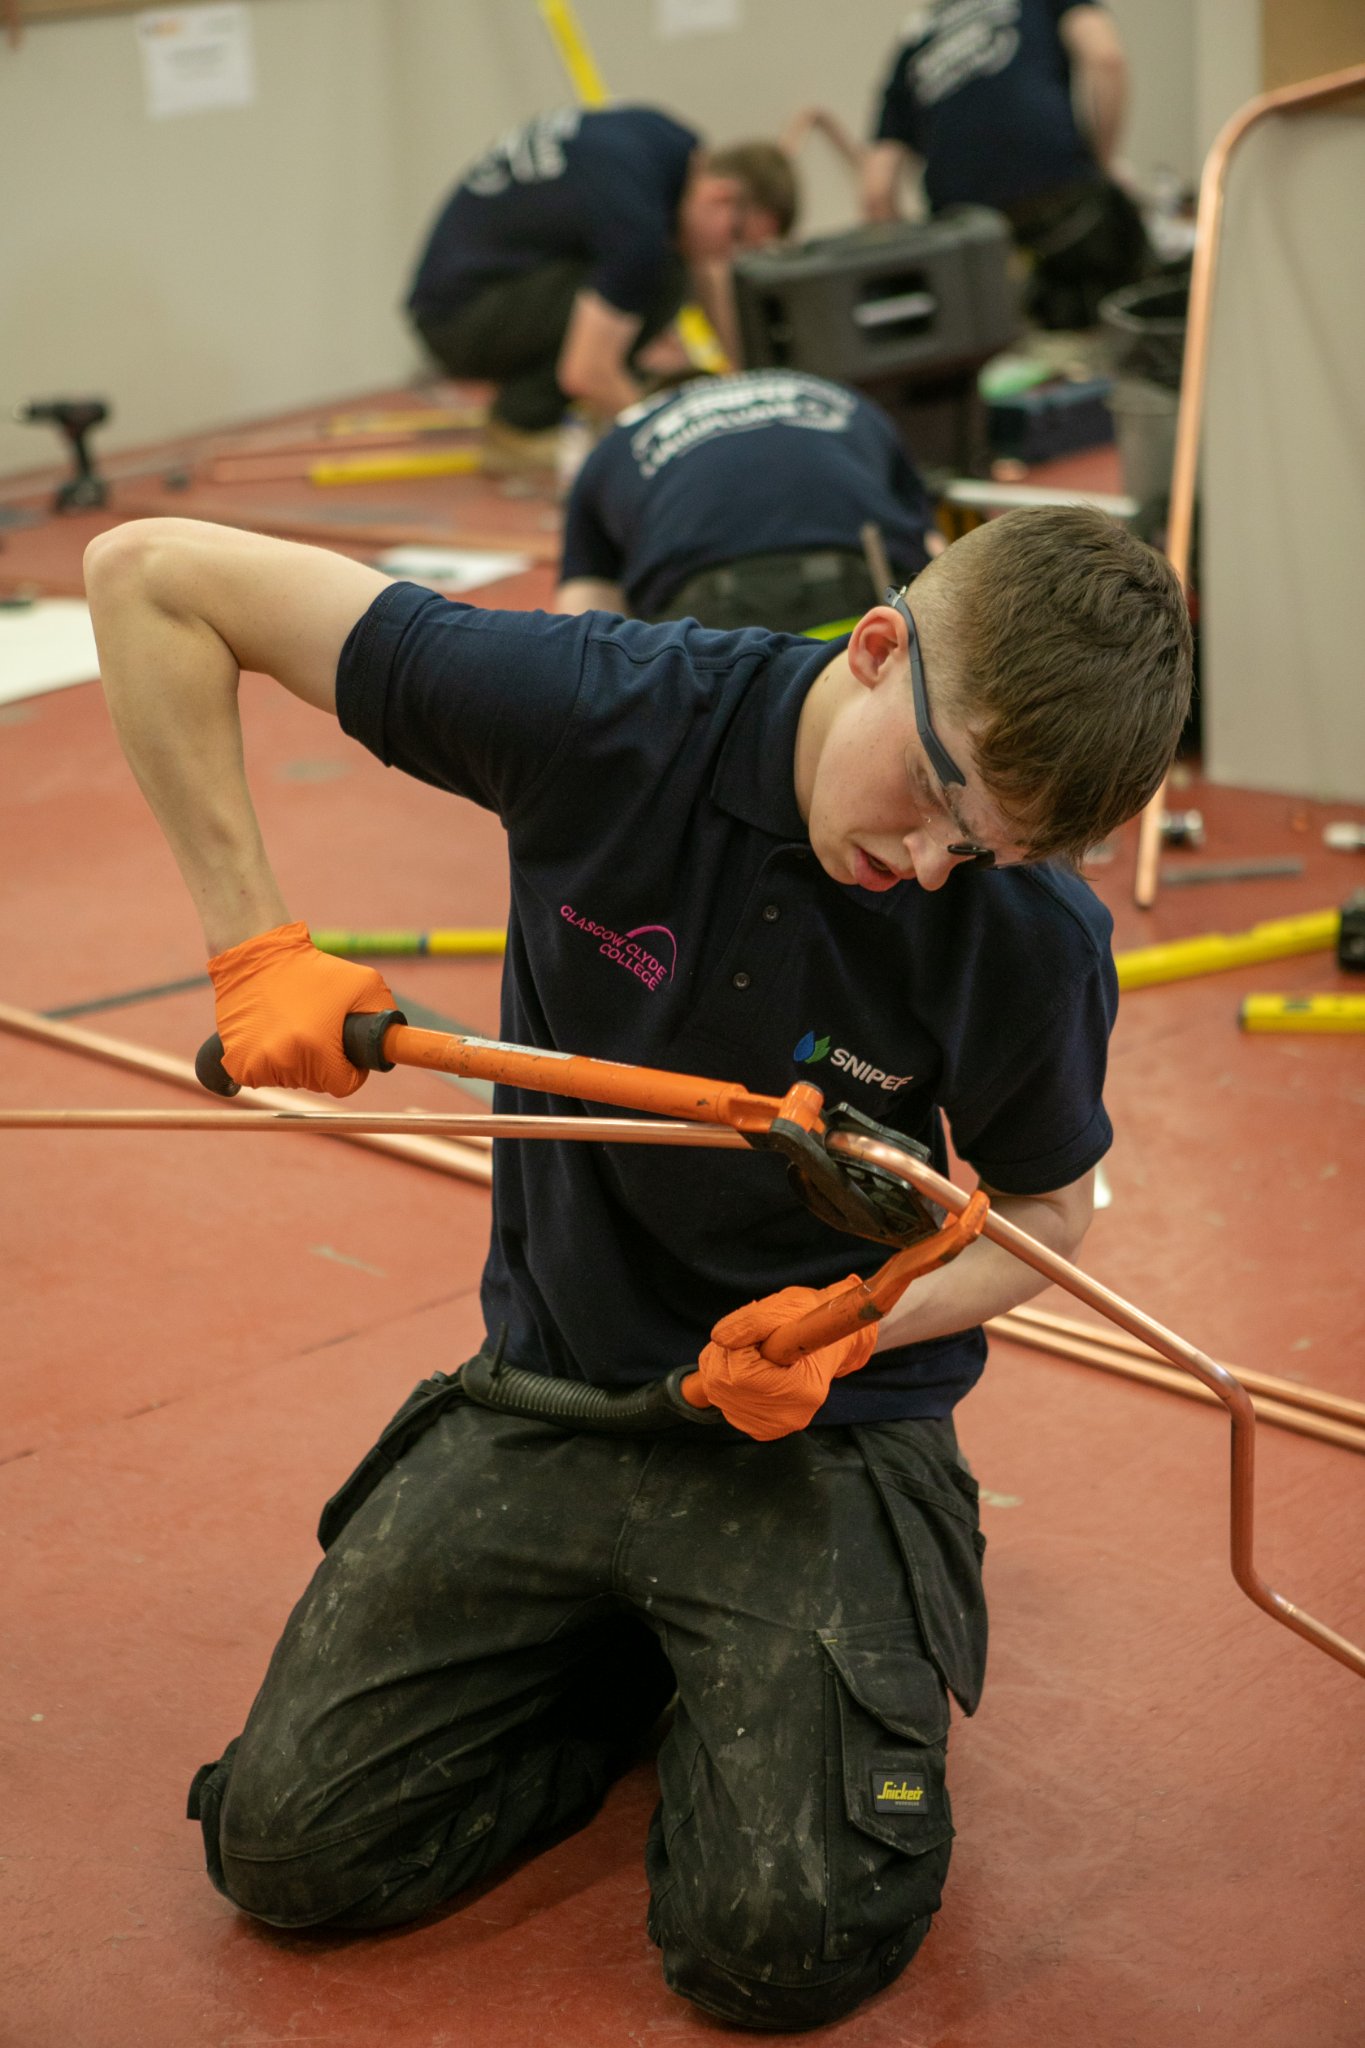 Scotland’s brightest plumbing apprentices vie for coveted title